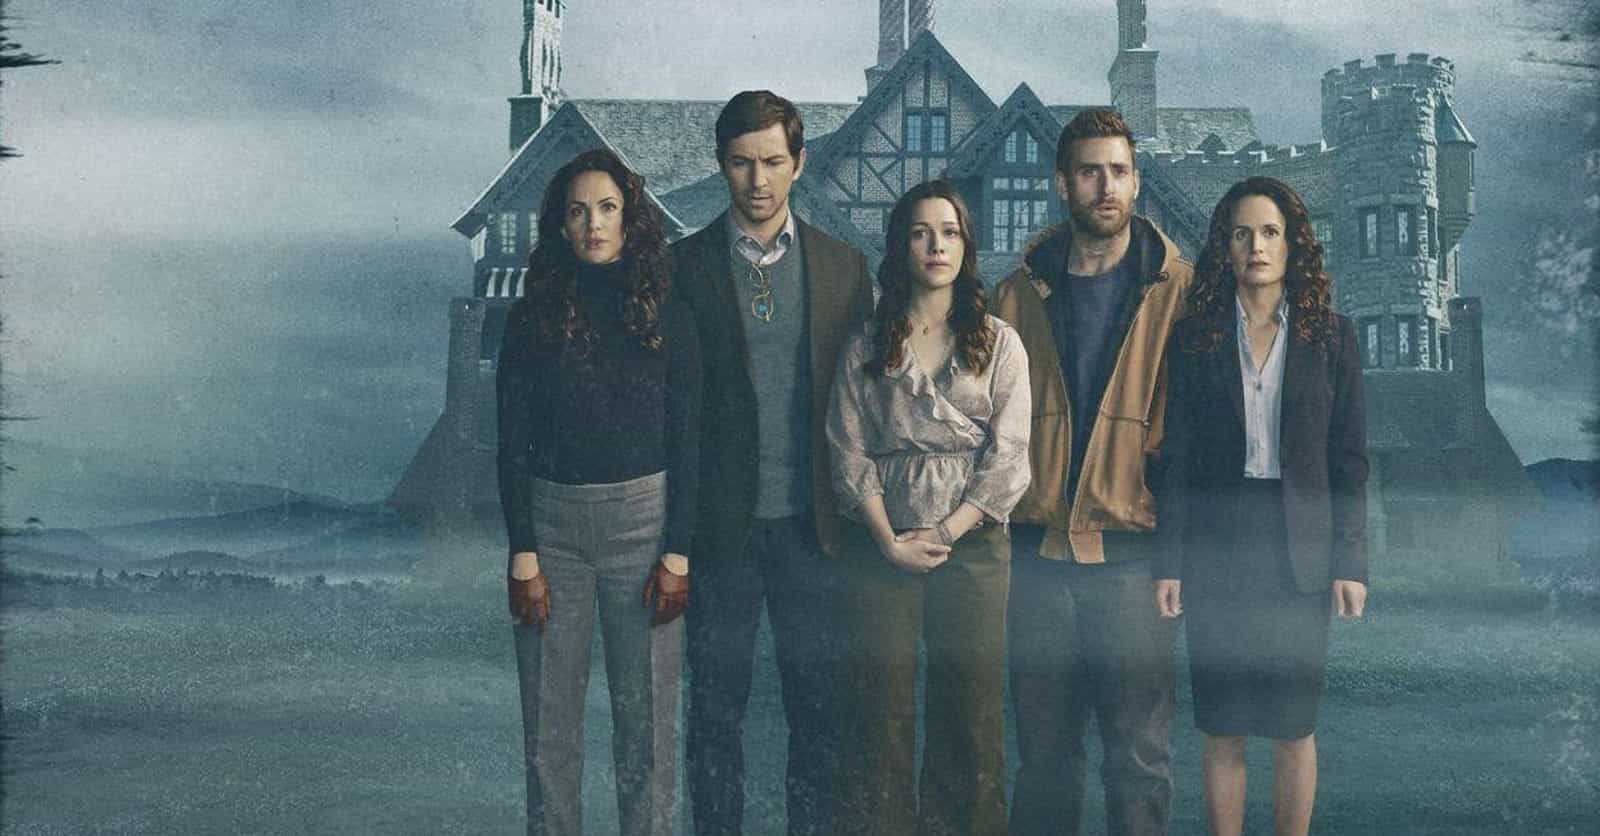 Here's Where You've Seen Everyone In 'The Haunting Of Hill House' Before